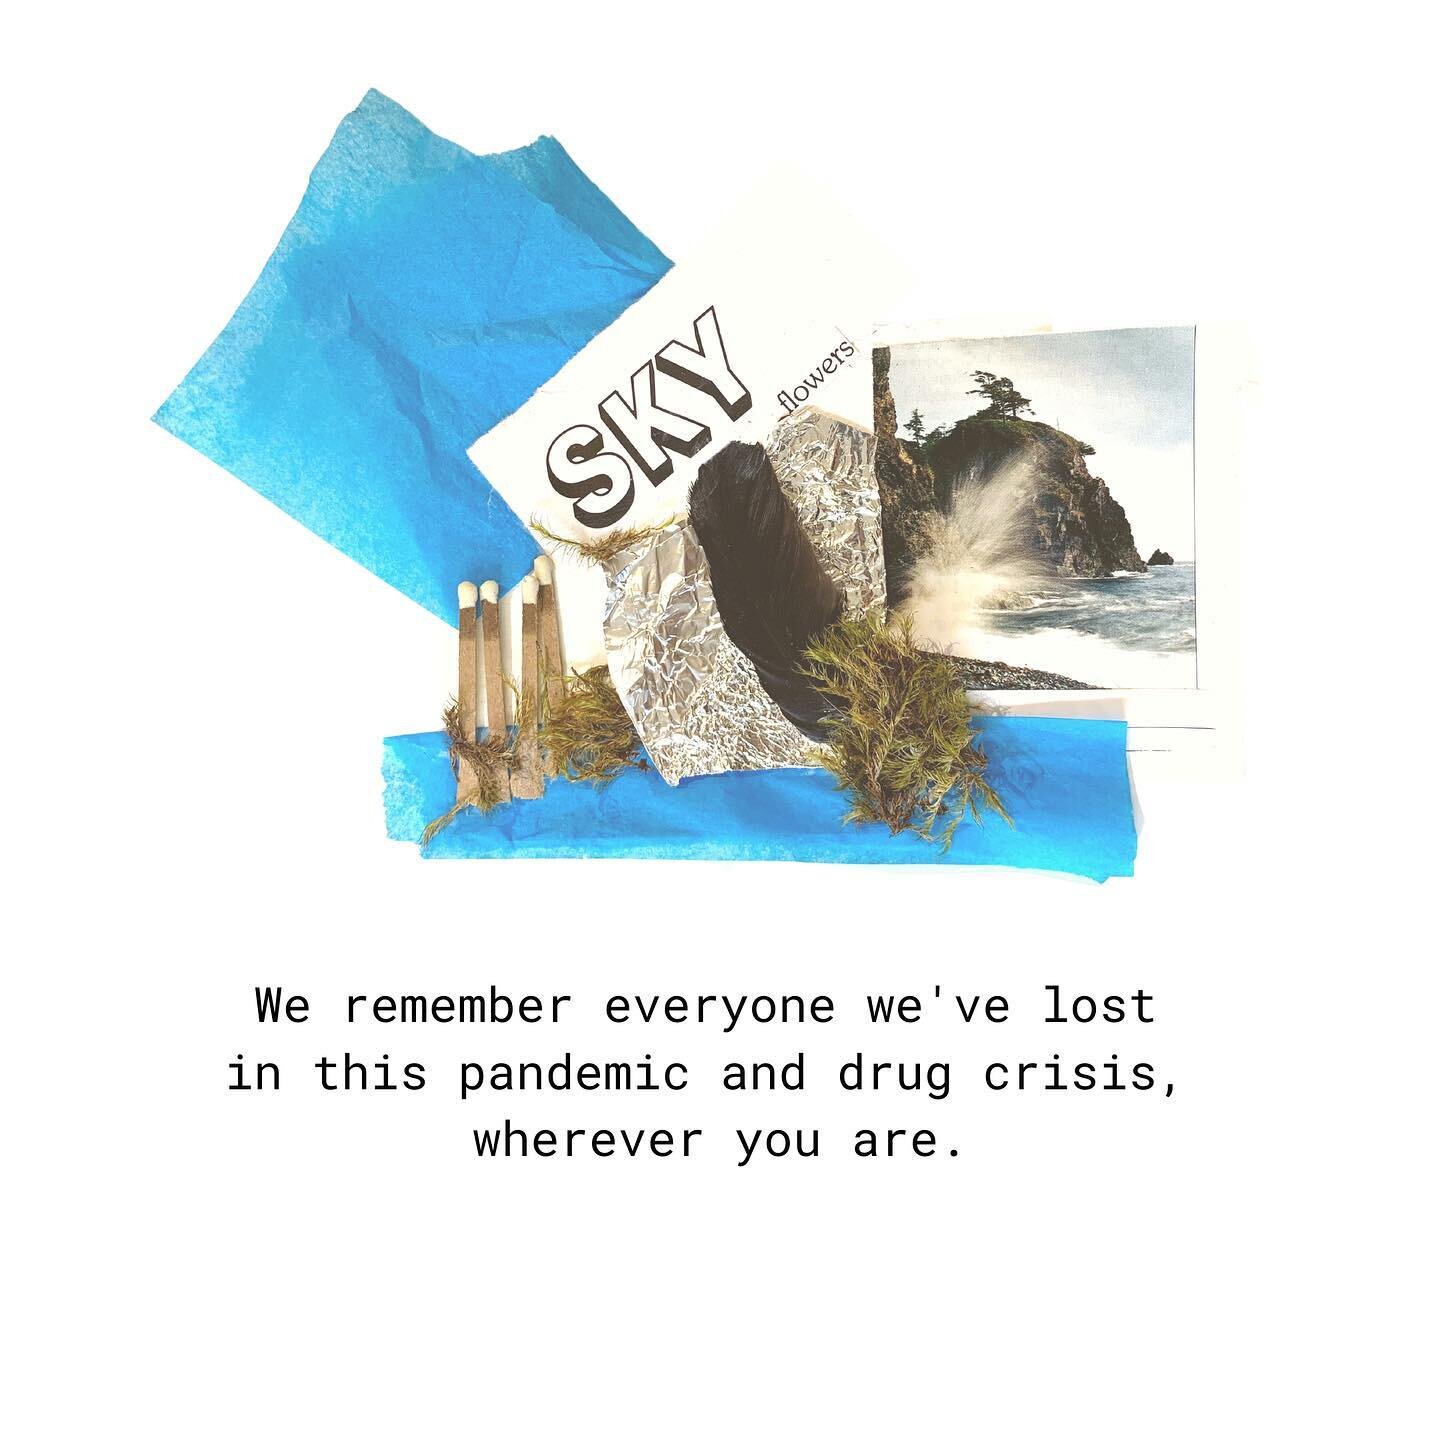 Overdose Awareness Day is today. Sending love out to those we've lost and their friends and family. There's a candlelight vigil at Willingdon Beach / ʔahʔǰumɩ&chi;ʷ
(Ah joo miexw) tonight, 8pm. All are welcome. 

This image is a part of a collage I h